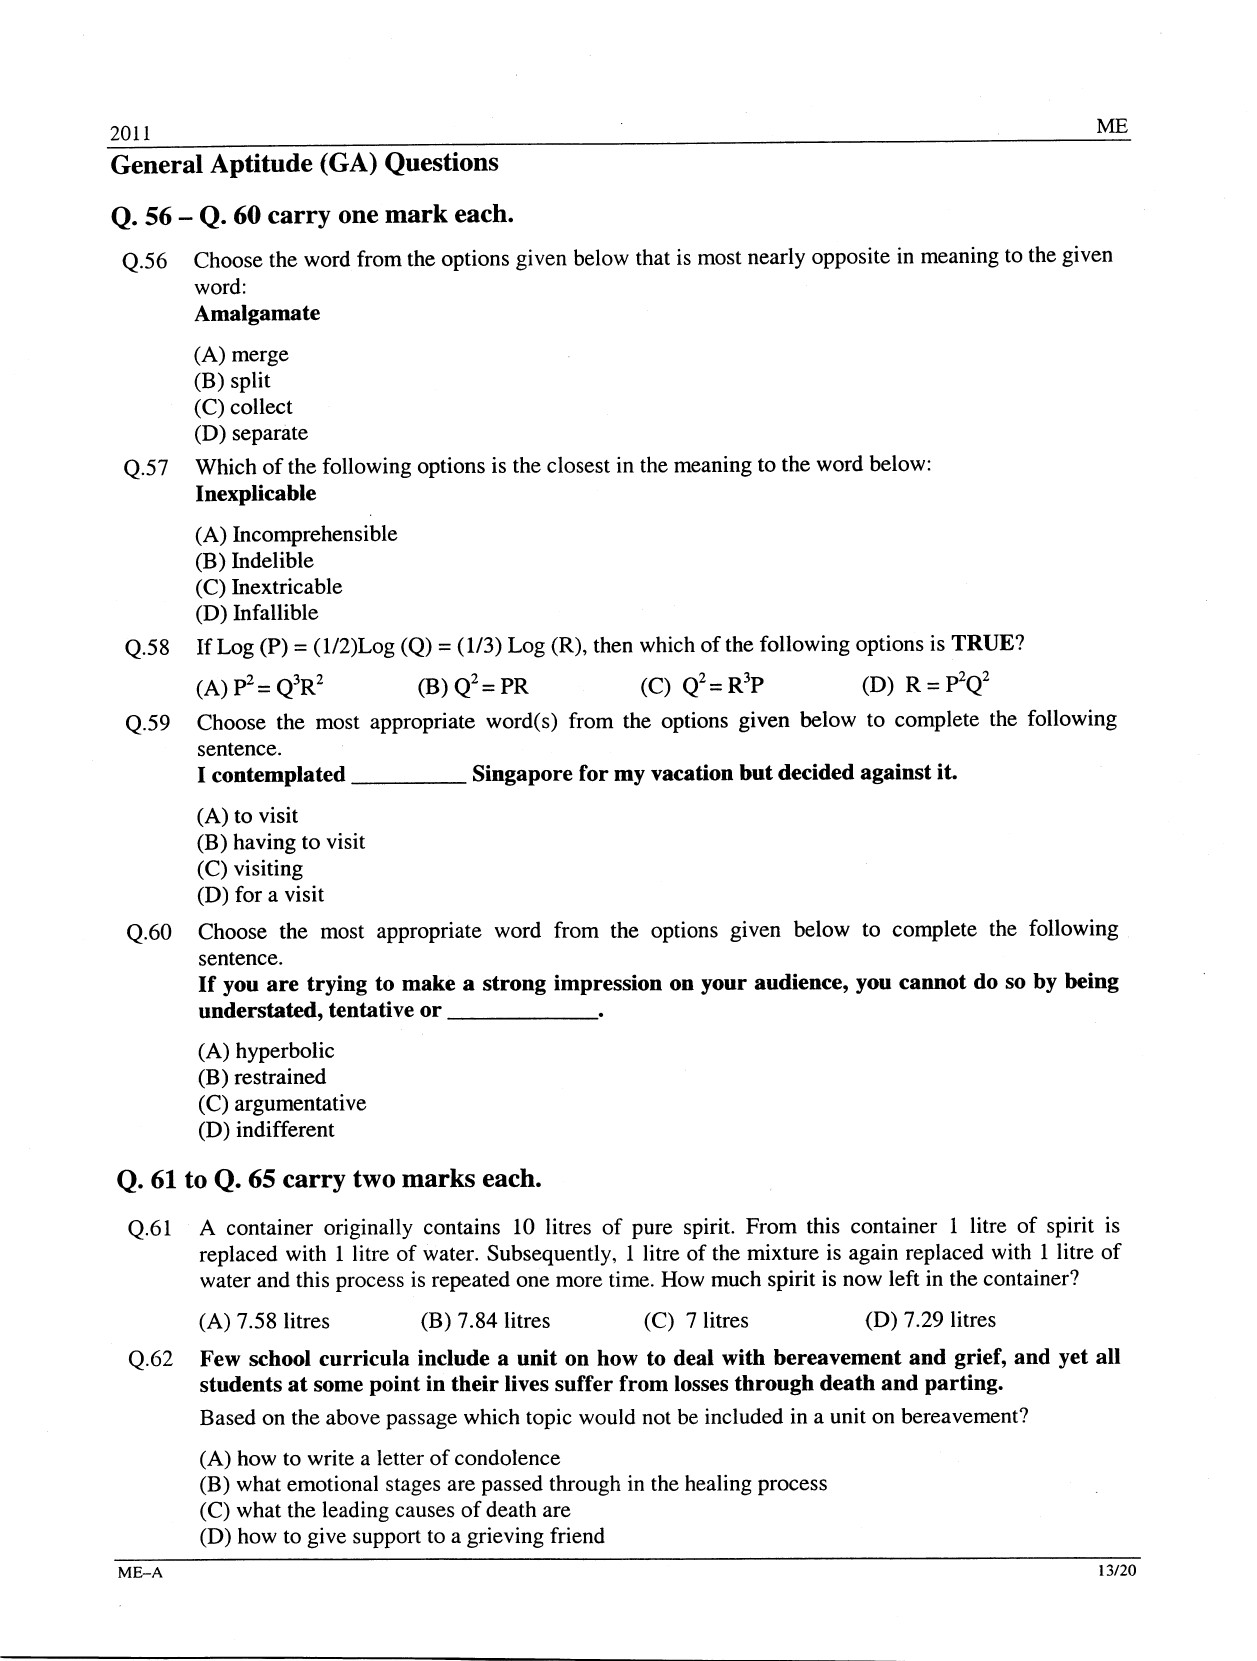 GATE Exam Question Paper 2011 Mechanical Engineering 13